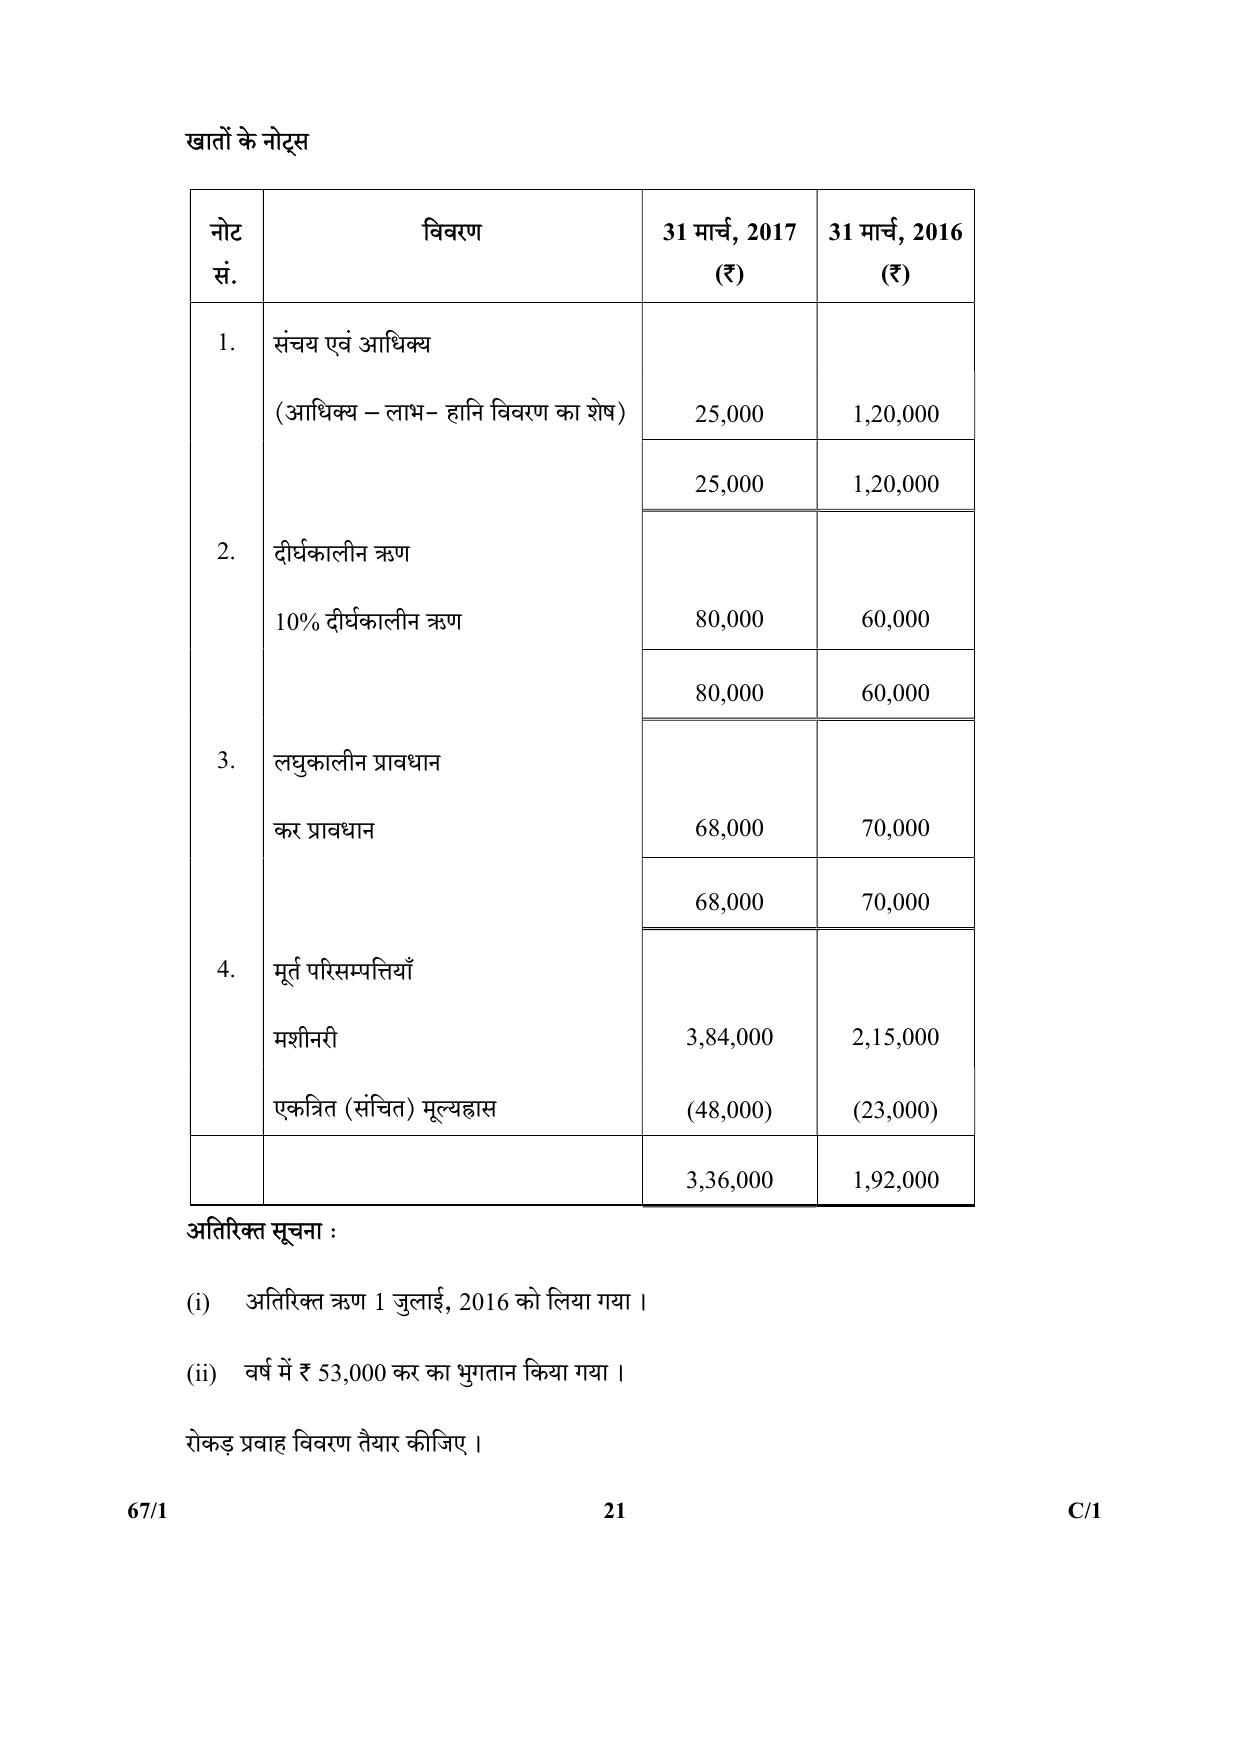 CBSE Class 12 67-1  (Accountancy) 2018 Compartment Question Paper - Page 21